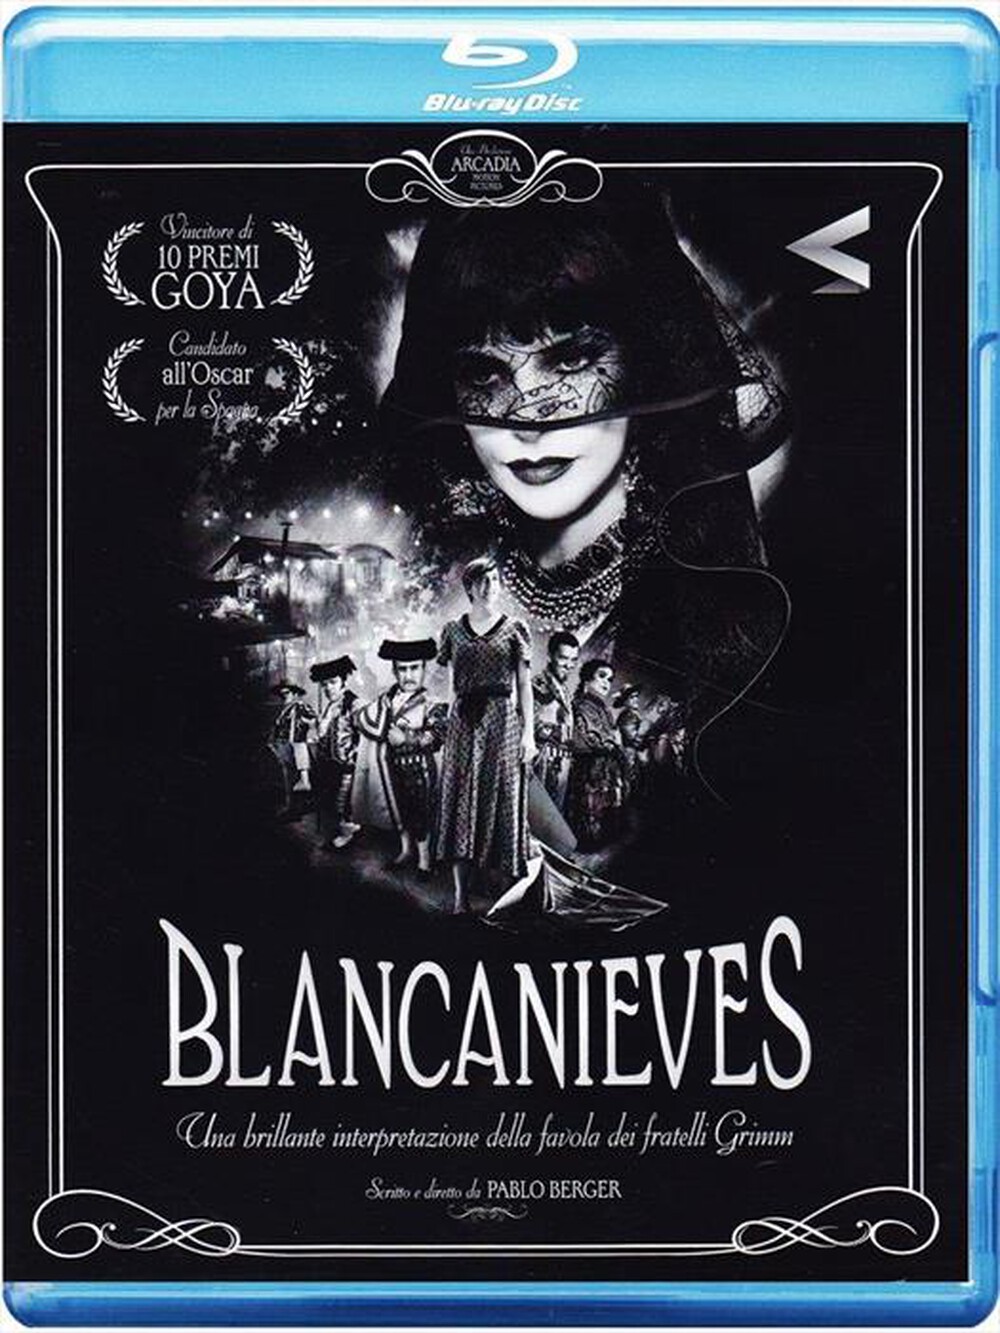 "EAGLE PICTURES - Blancanieves"